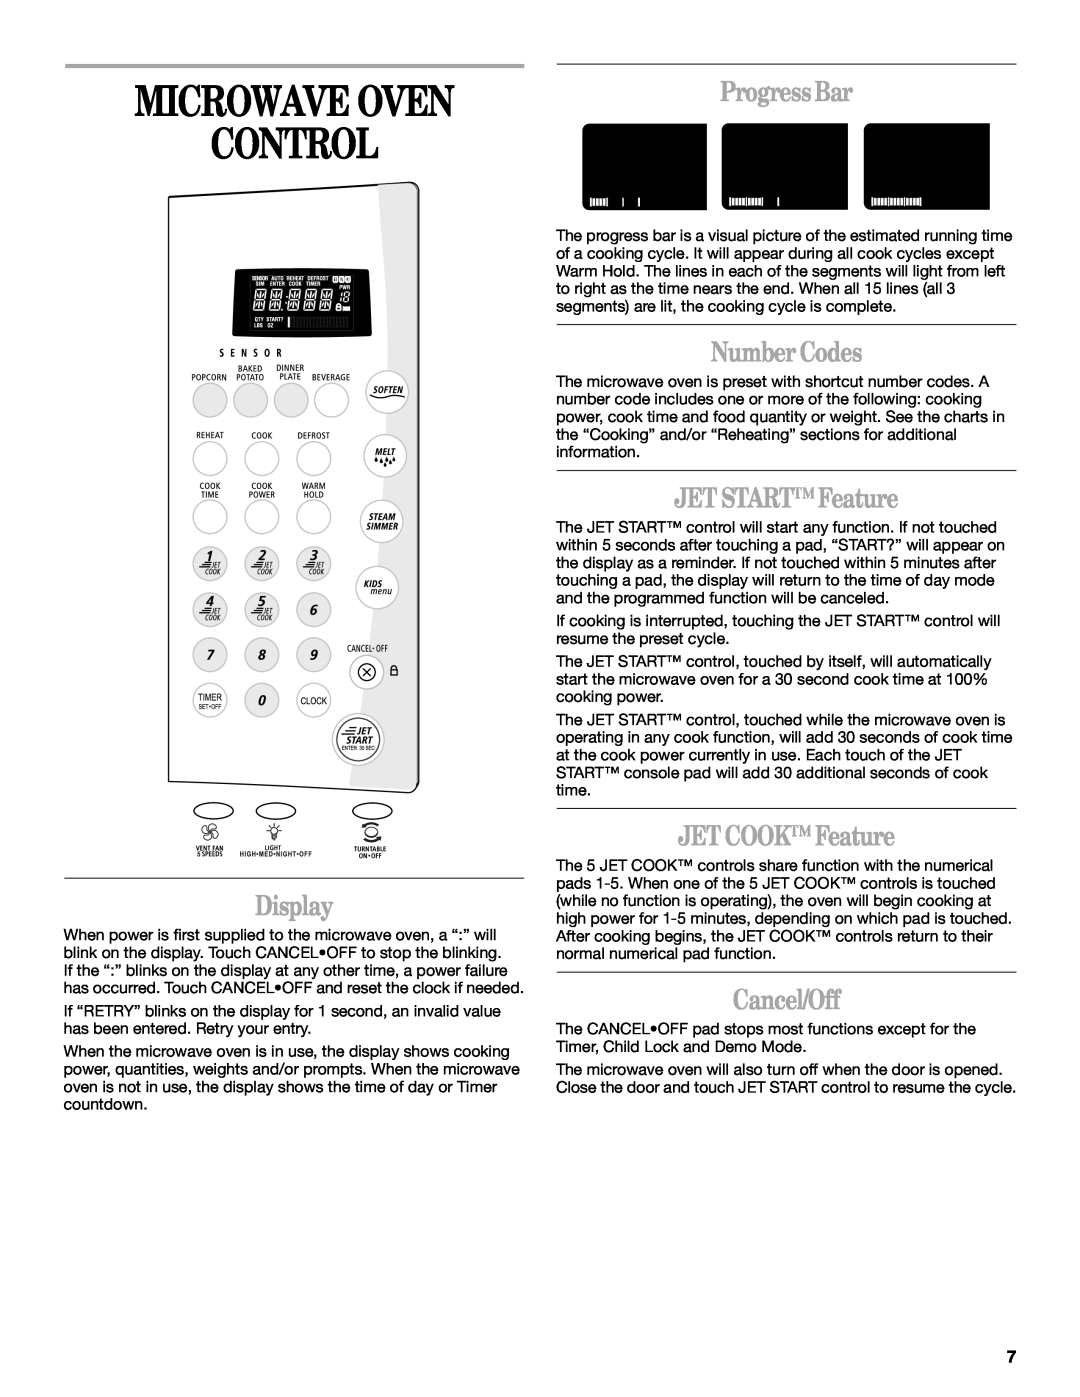 Whirlpool GH9176XM manual Microwave Oven Control, Progress Bar, Display, Number Codes, JET START Feature, JET COOK Feature 